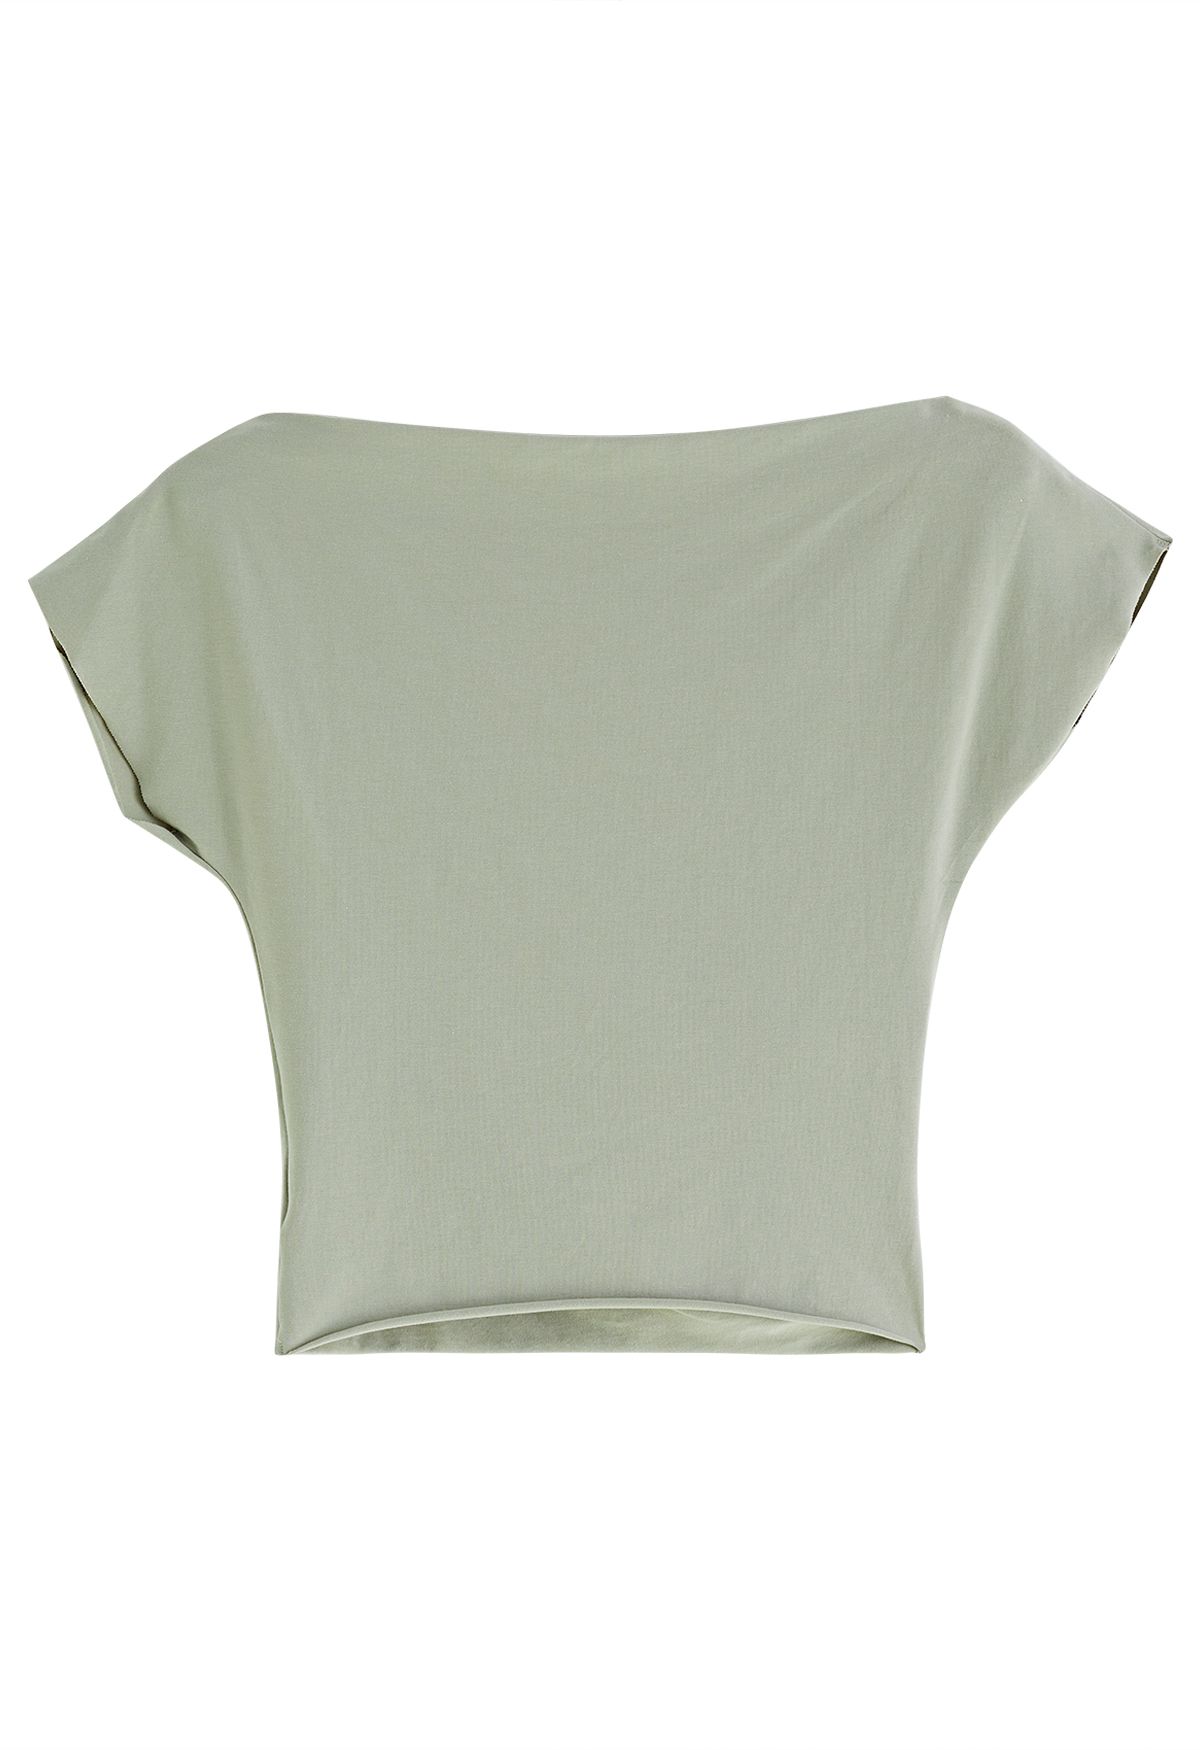 Asymmetric Boat Neck Ruched Top in Pea Green